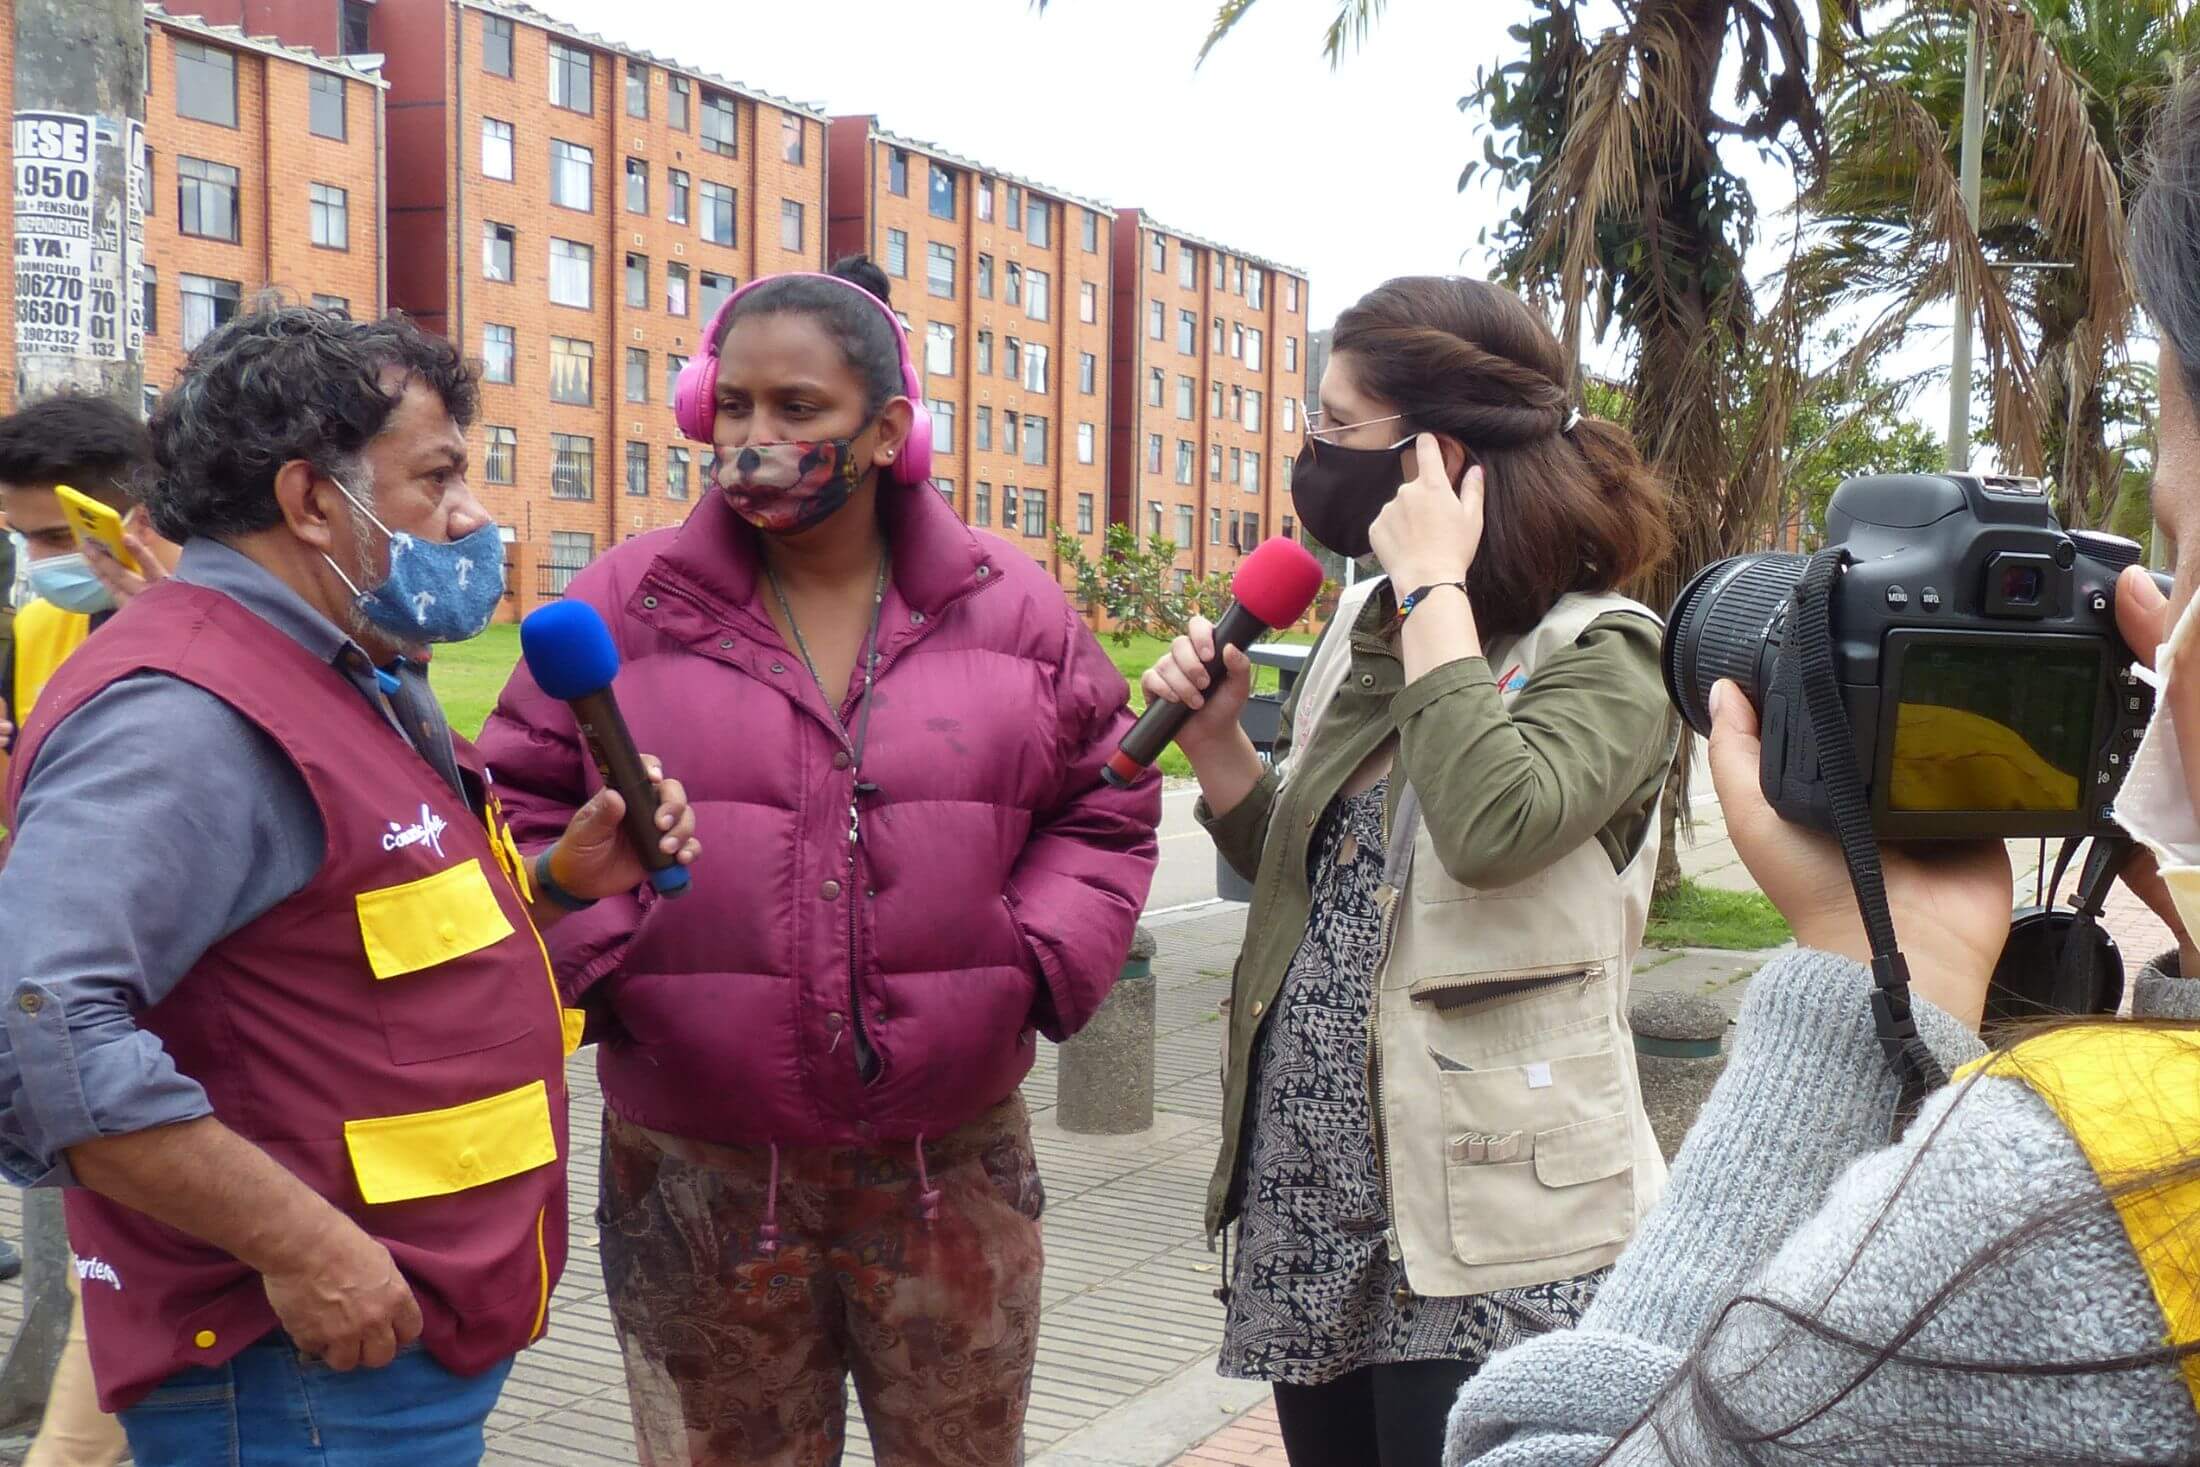 A male and a female citizen journalist interview a woman outside in a public square while a woman videos with a camera. All are wearing face masks.